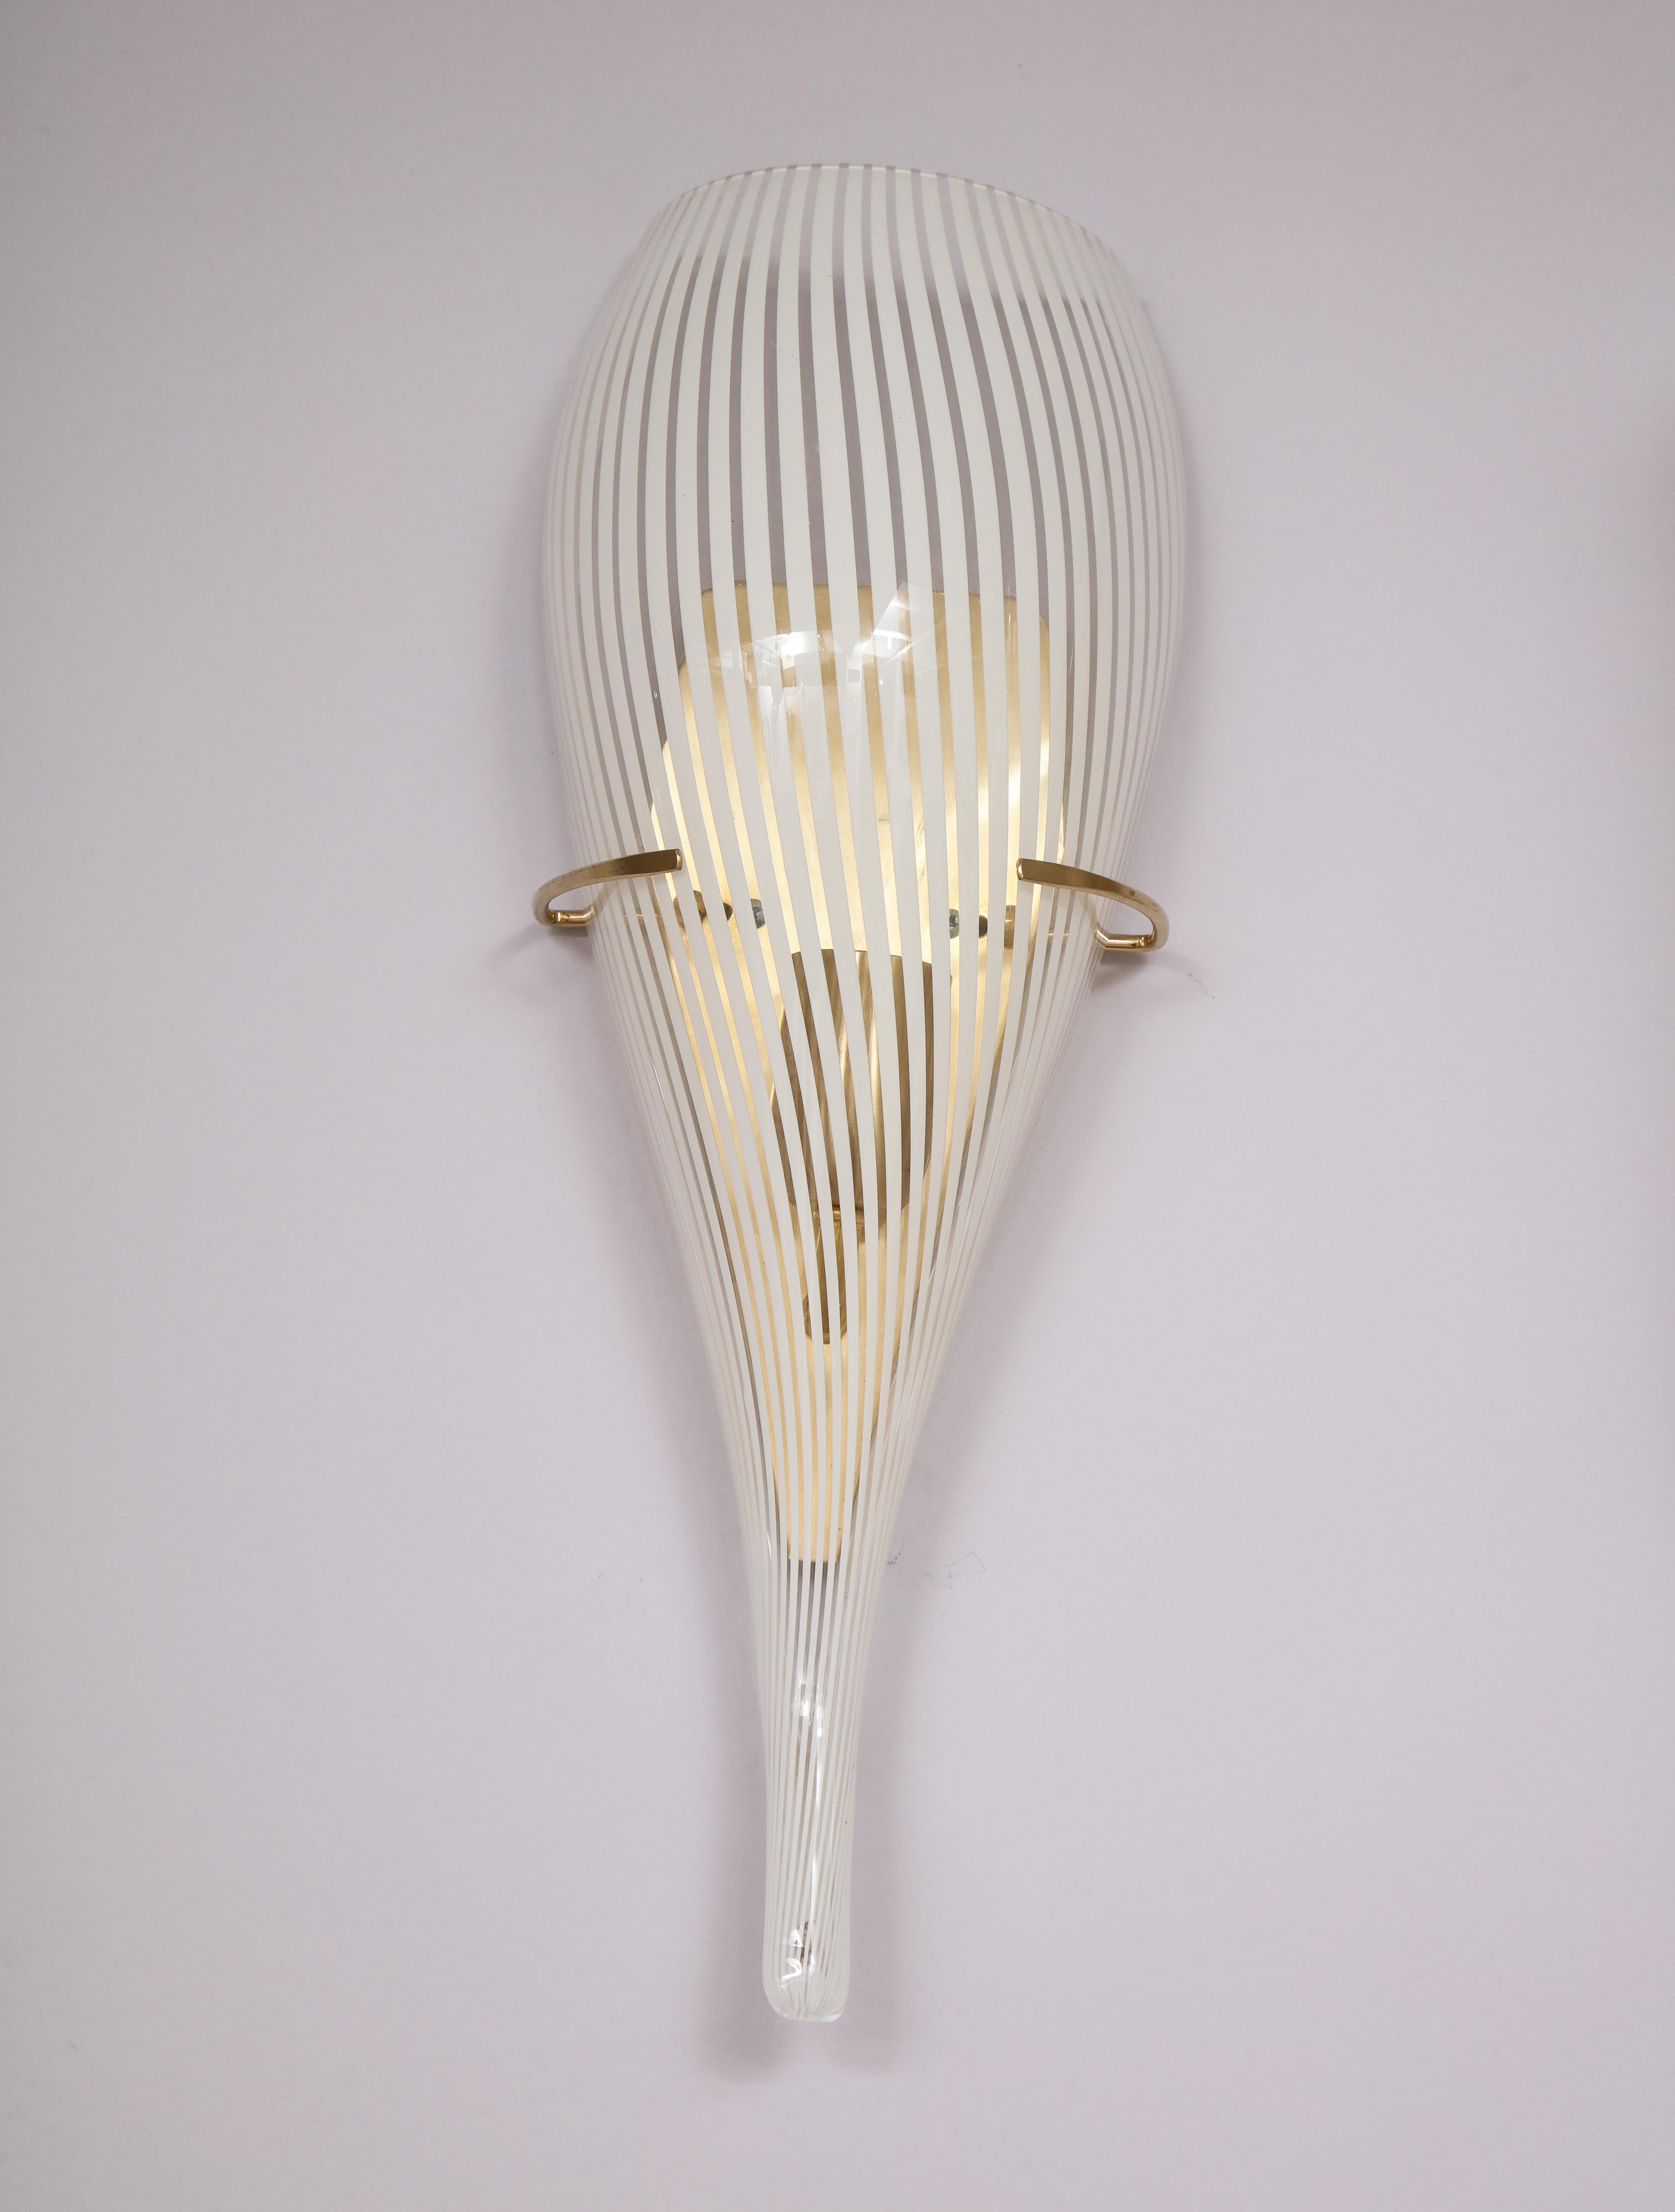 A pair of Italian Murano glass white and clear striped opaline wall sconces, of elongated conical shape; supported by triangular brass wall plaques with elegant ring holders on the face.
Italy, circa 1960
Size: 19